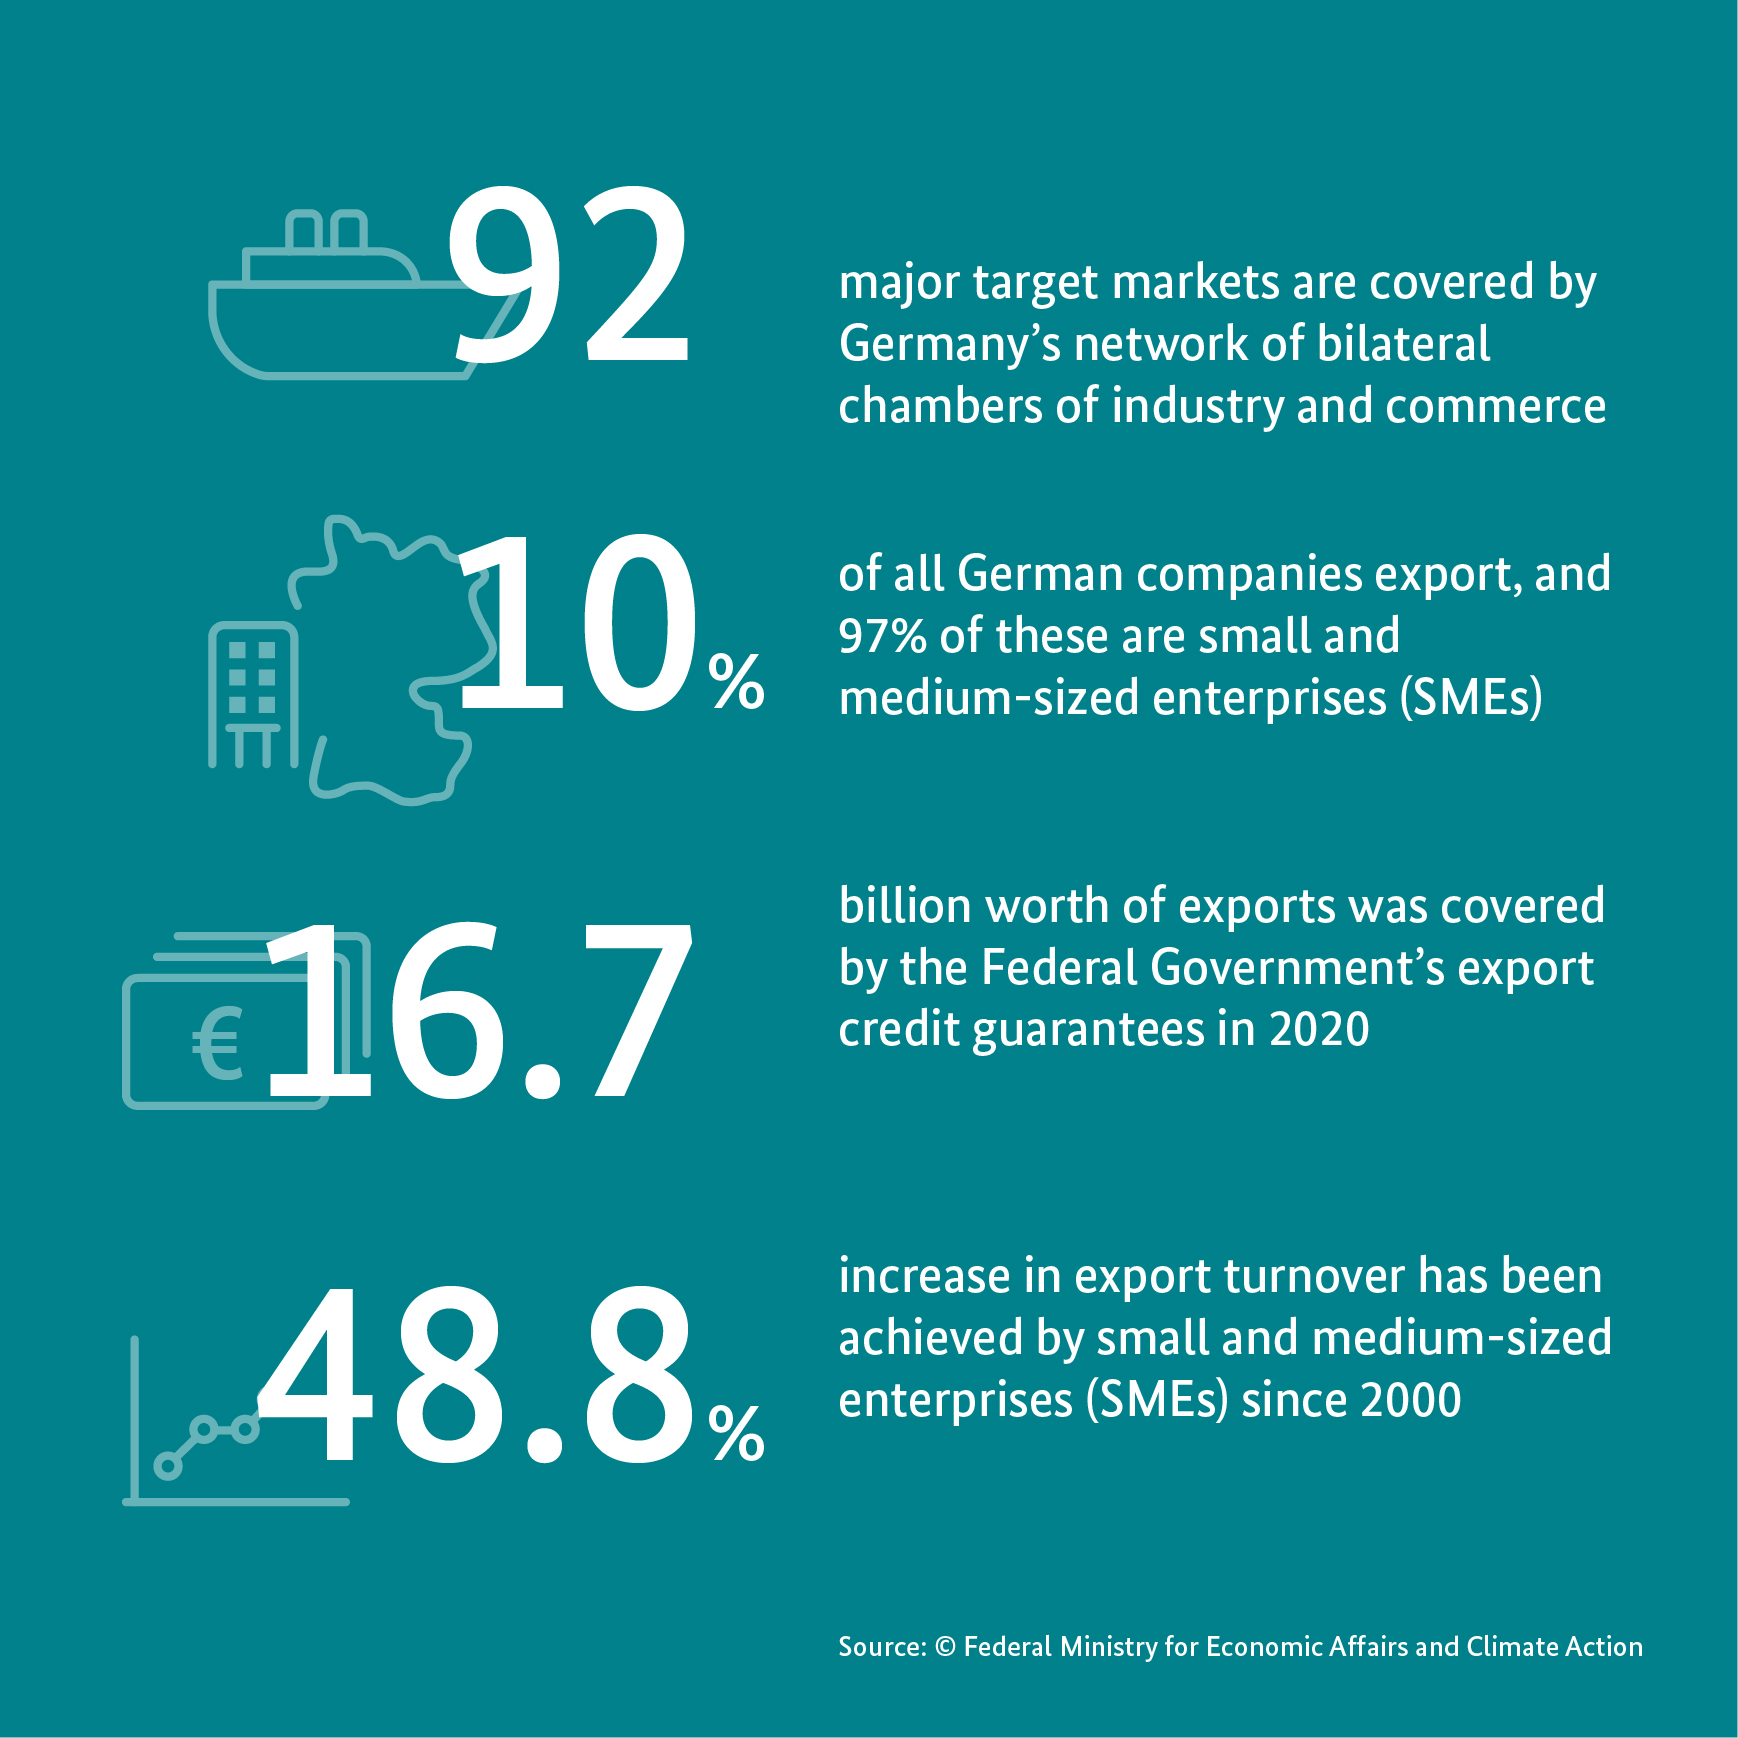 Facts and figures on Germany’s foreign trade and investment